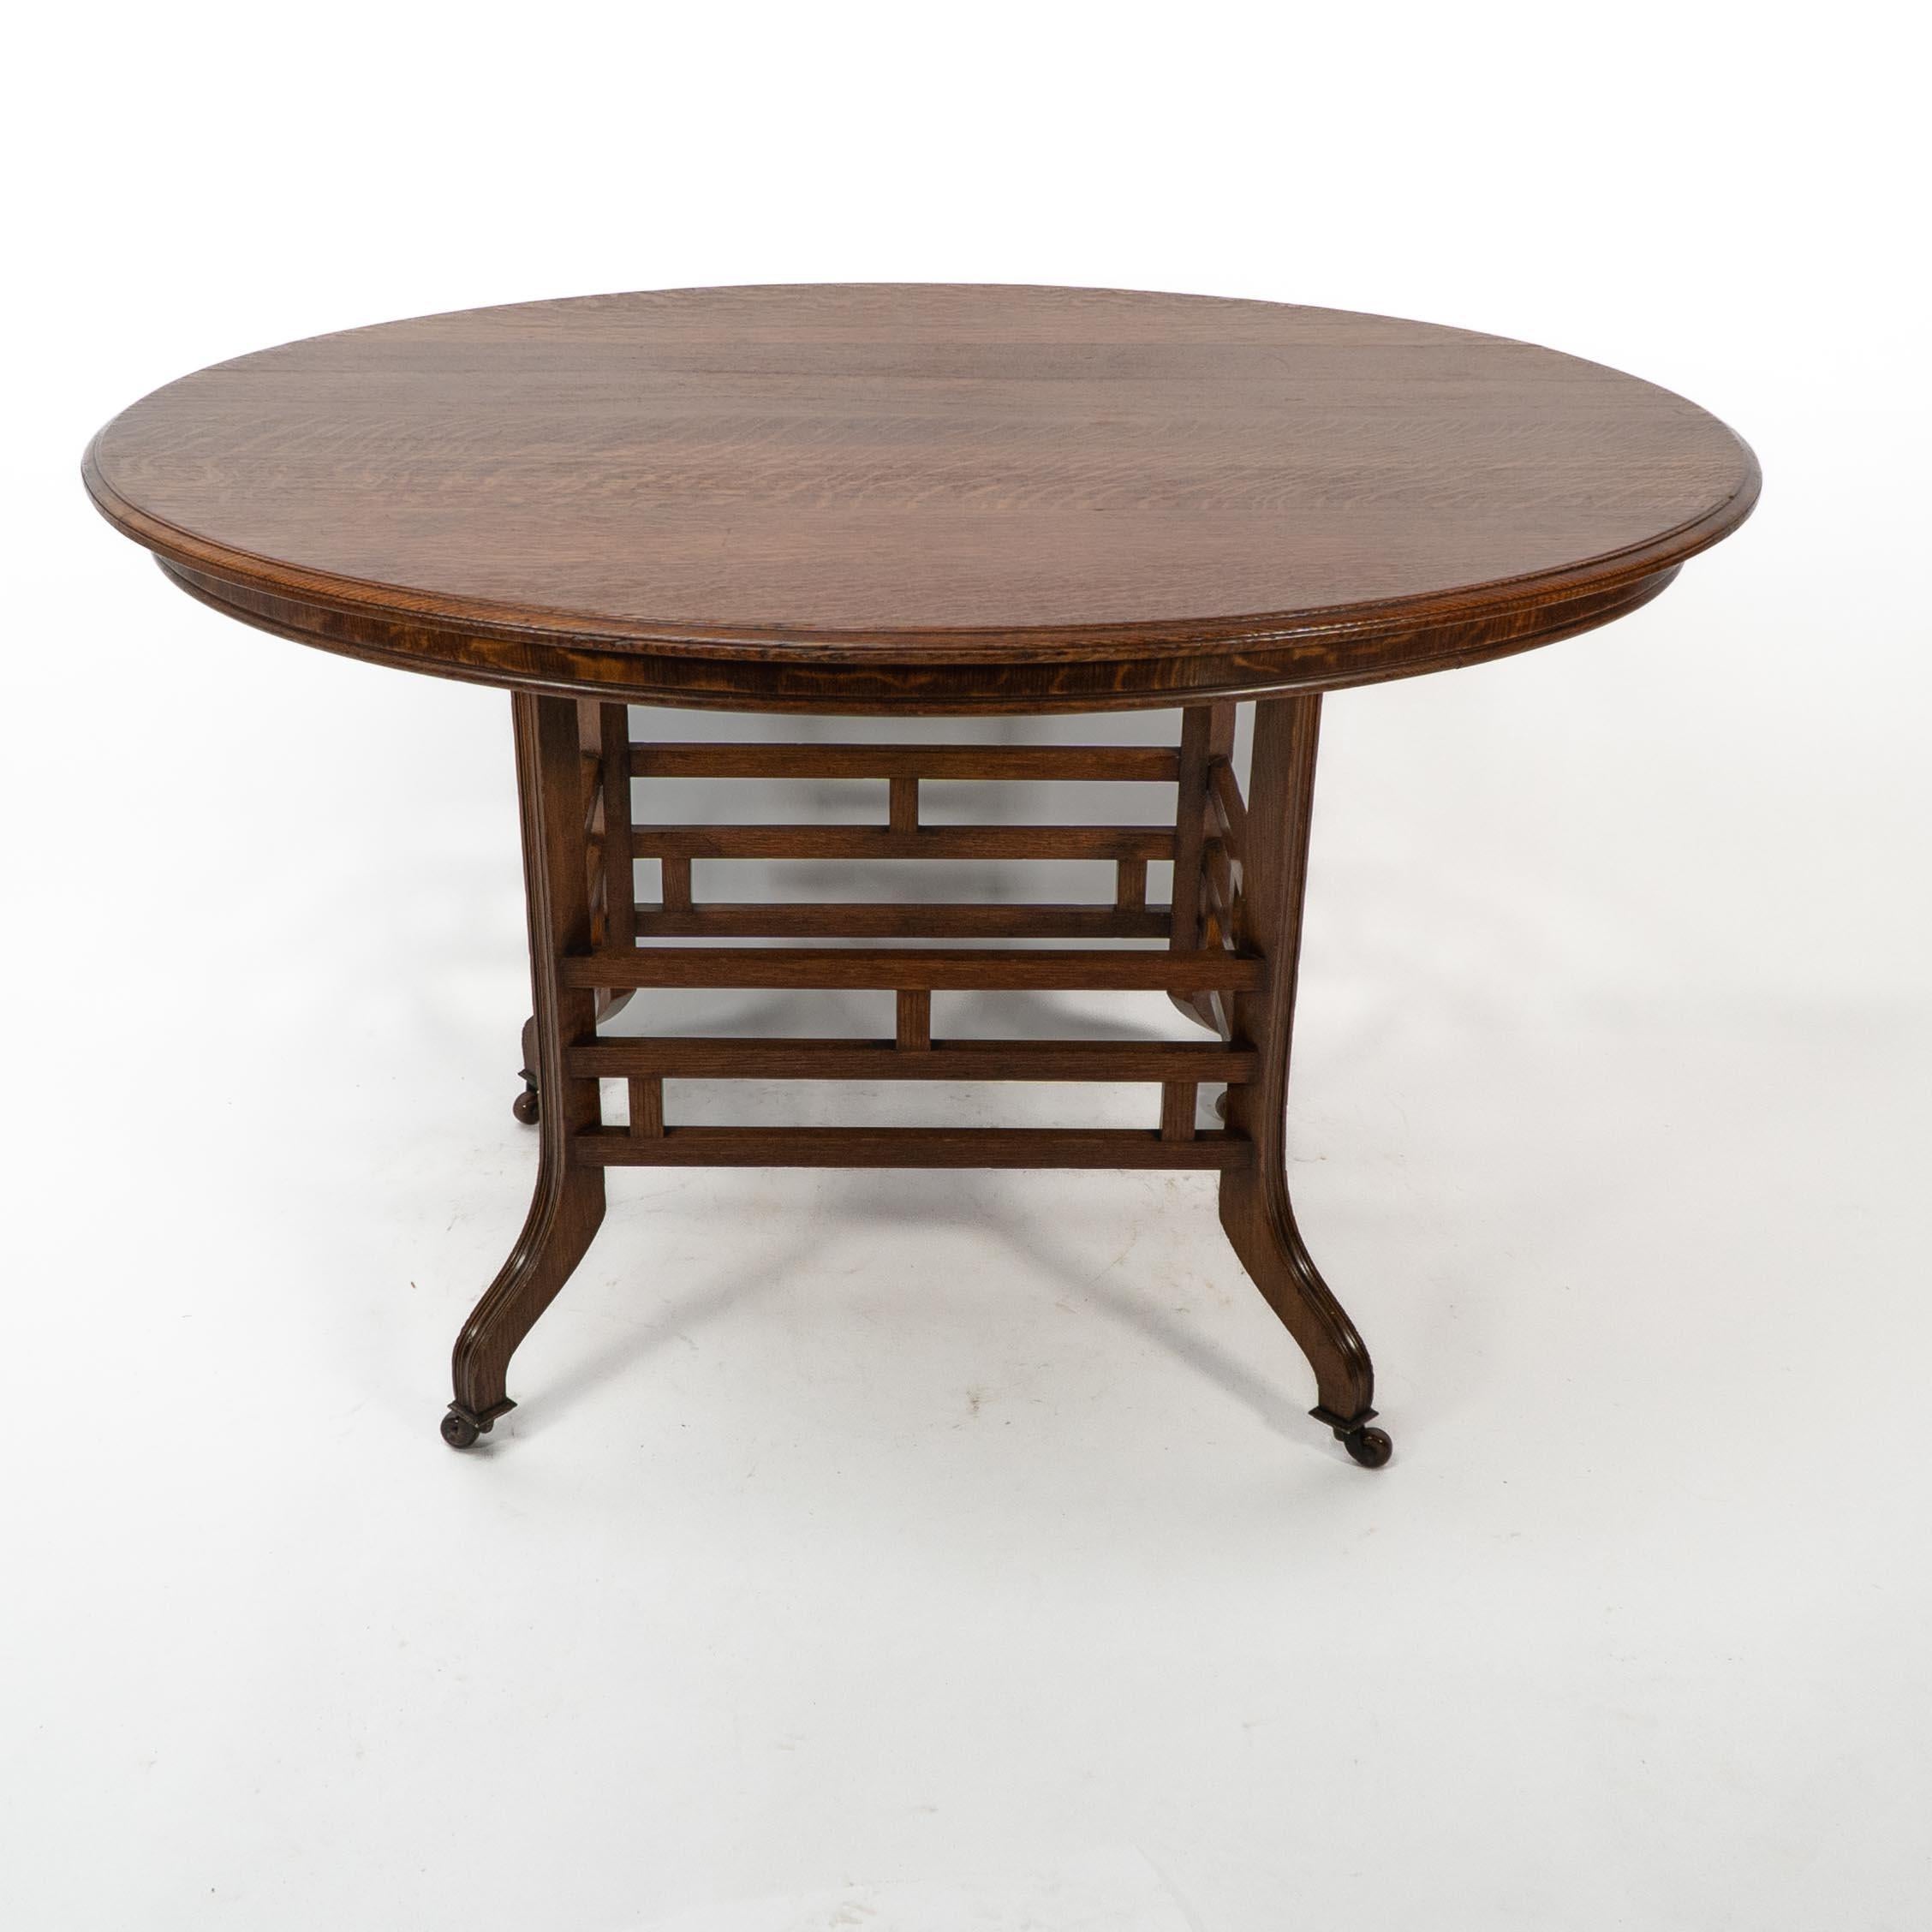 Late 19th Century Lambs of Manchester, stamped Lambs. A rare Anglo-Japanese oak oval centre table For Sale